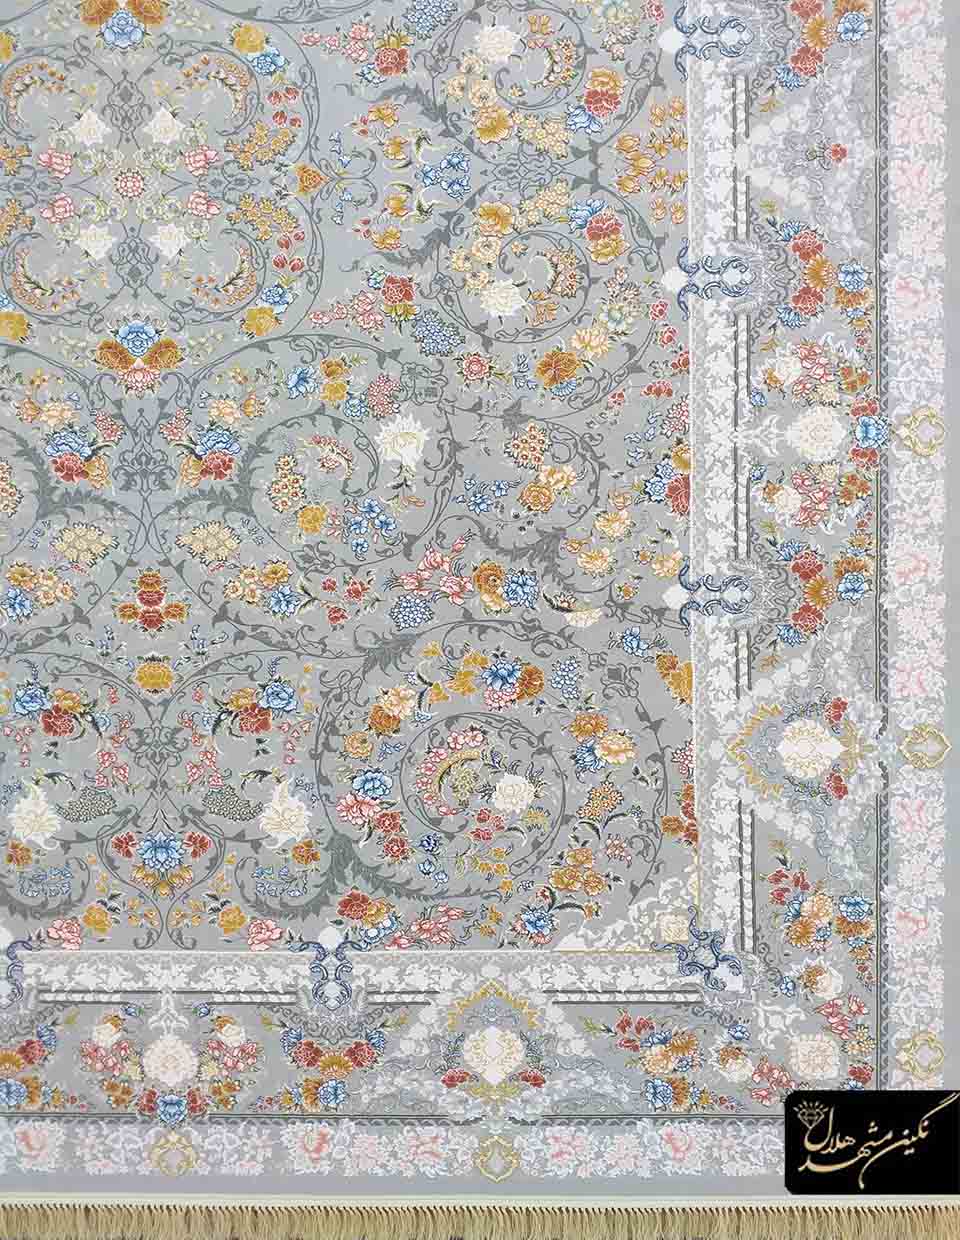 Machine-made Cream and Grey Floral Persian Area Rug 5209